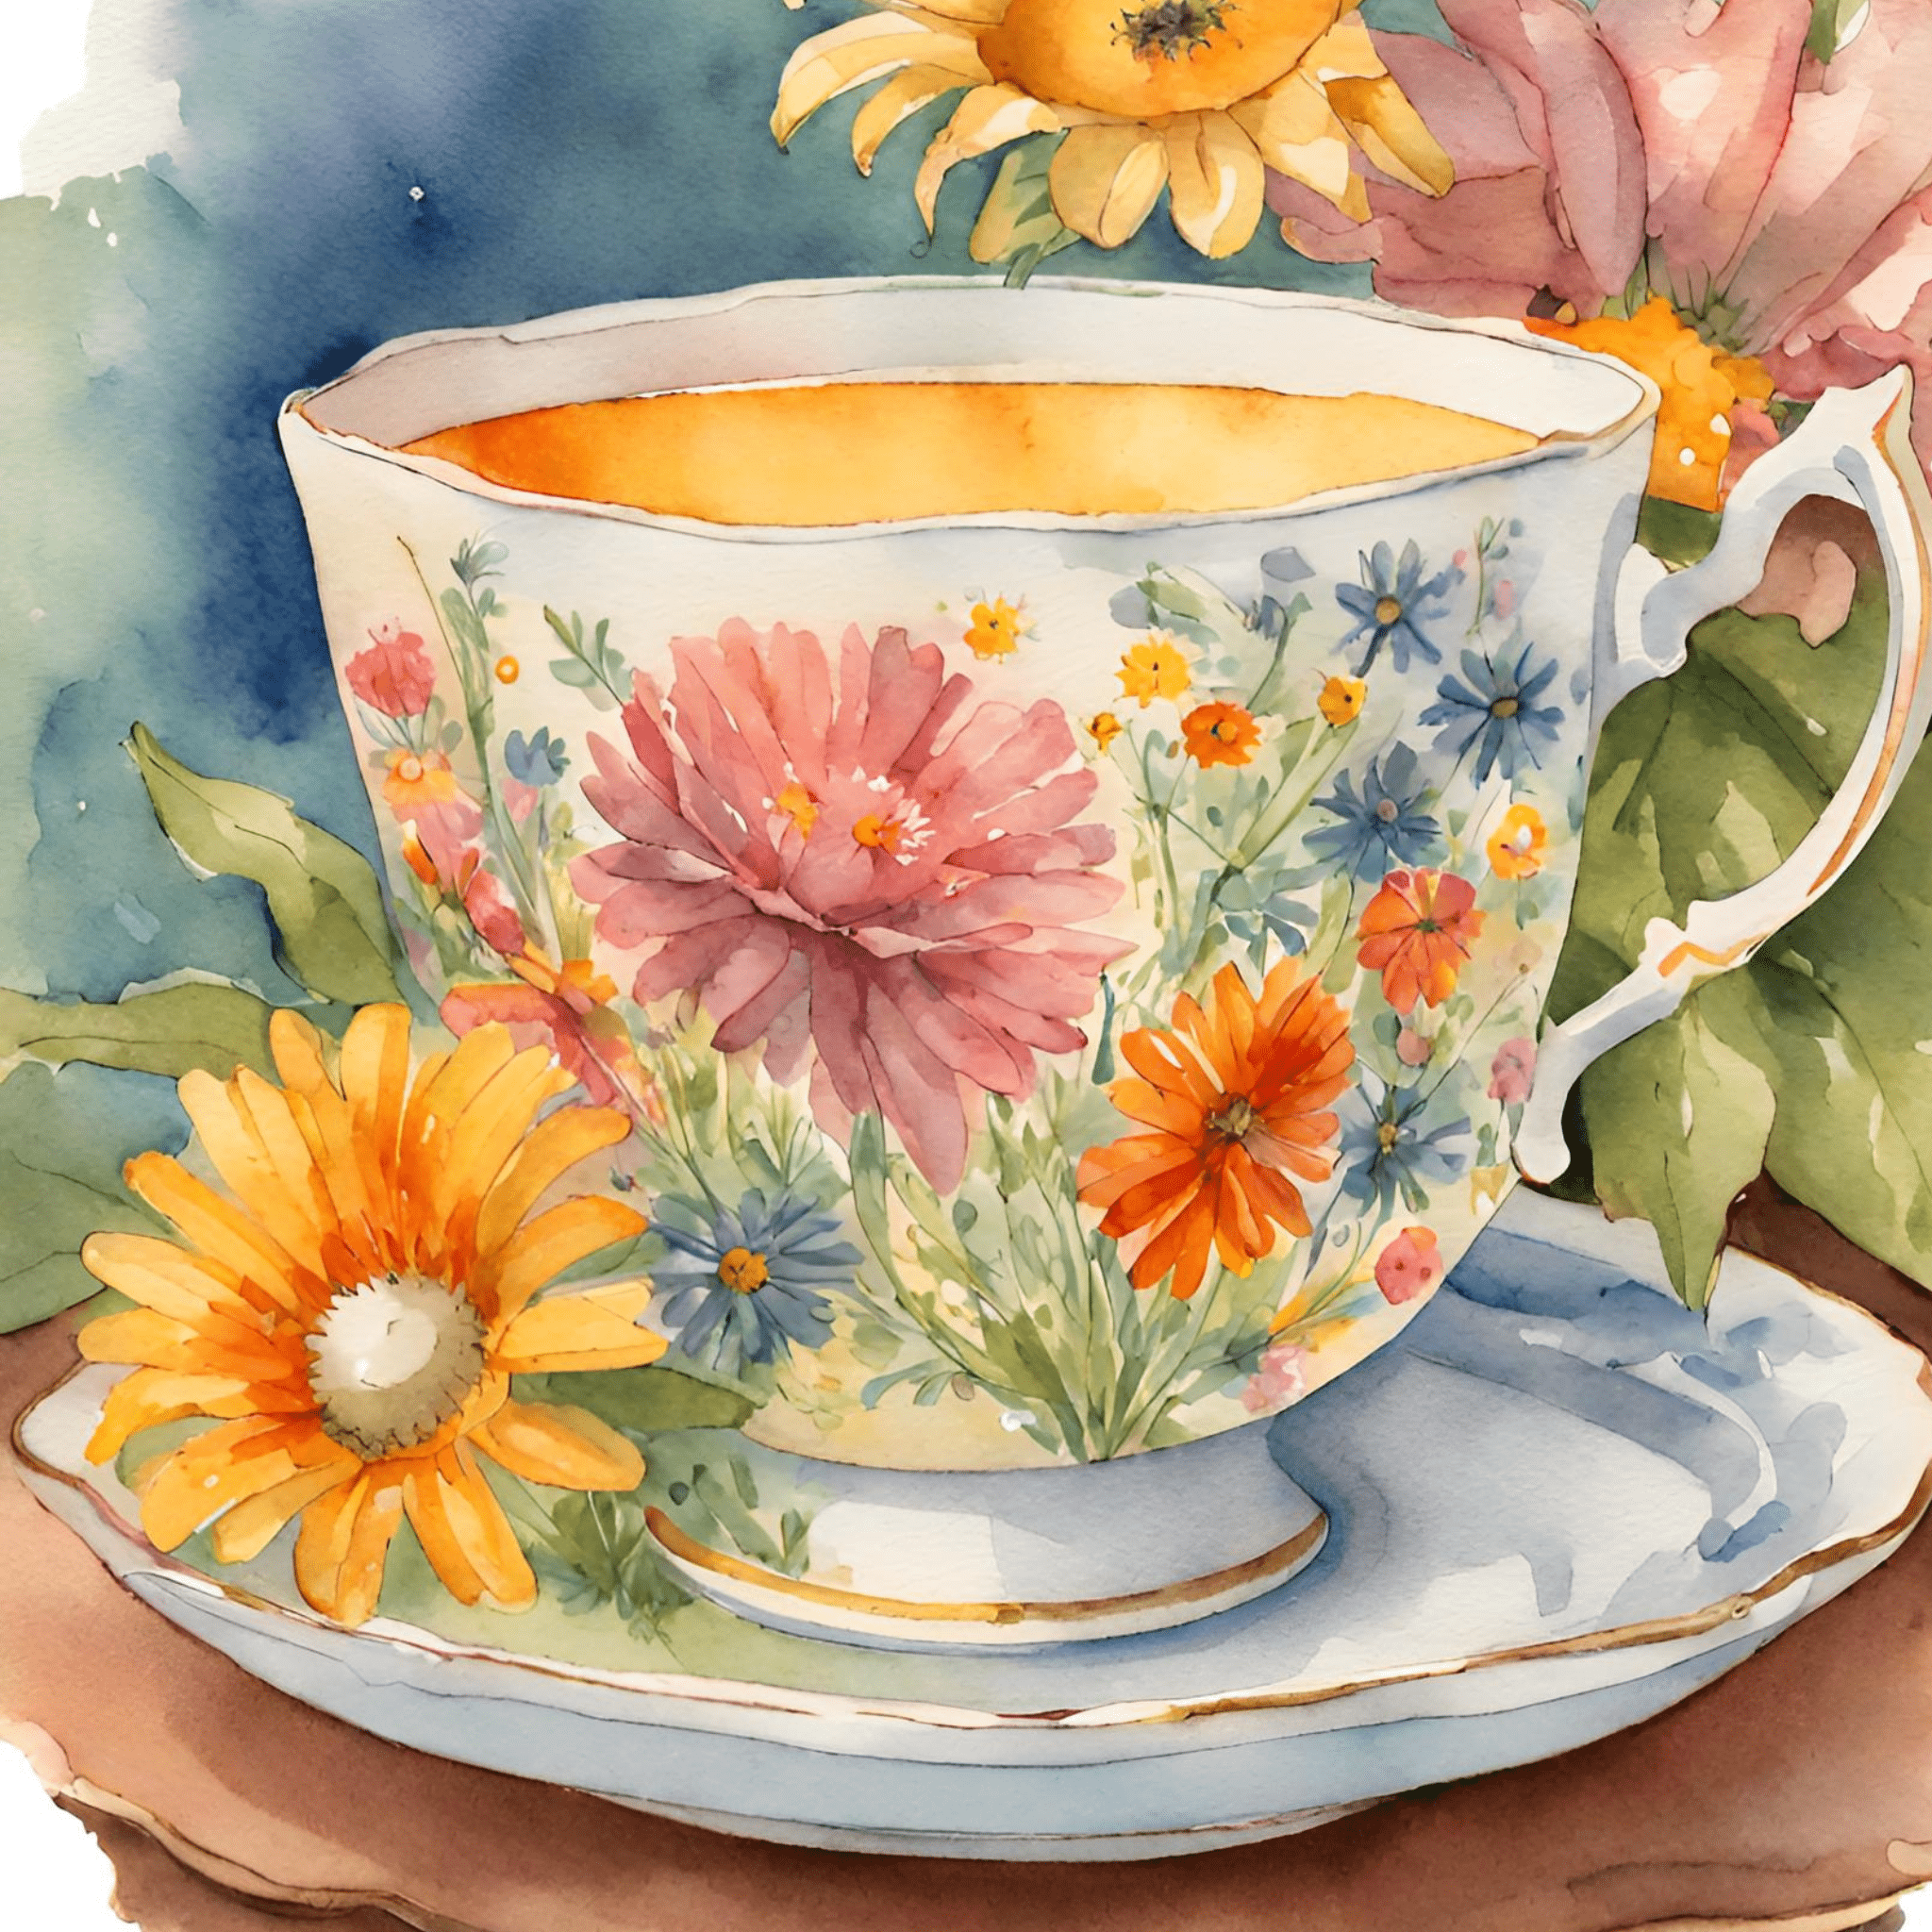 TEACUP WITH DAISY ART PRINT - PLUME & WILLOW